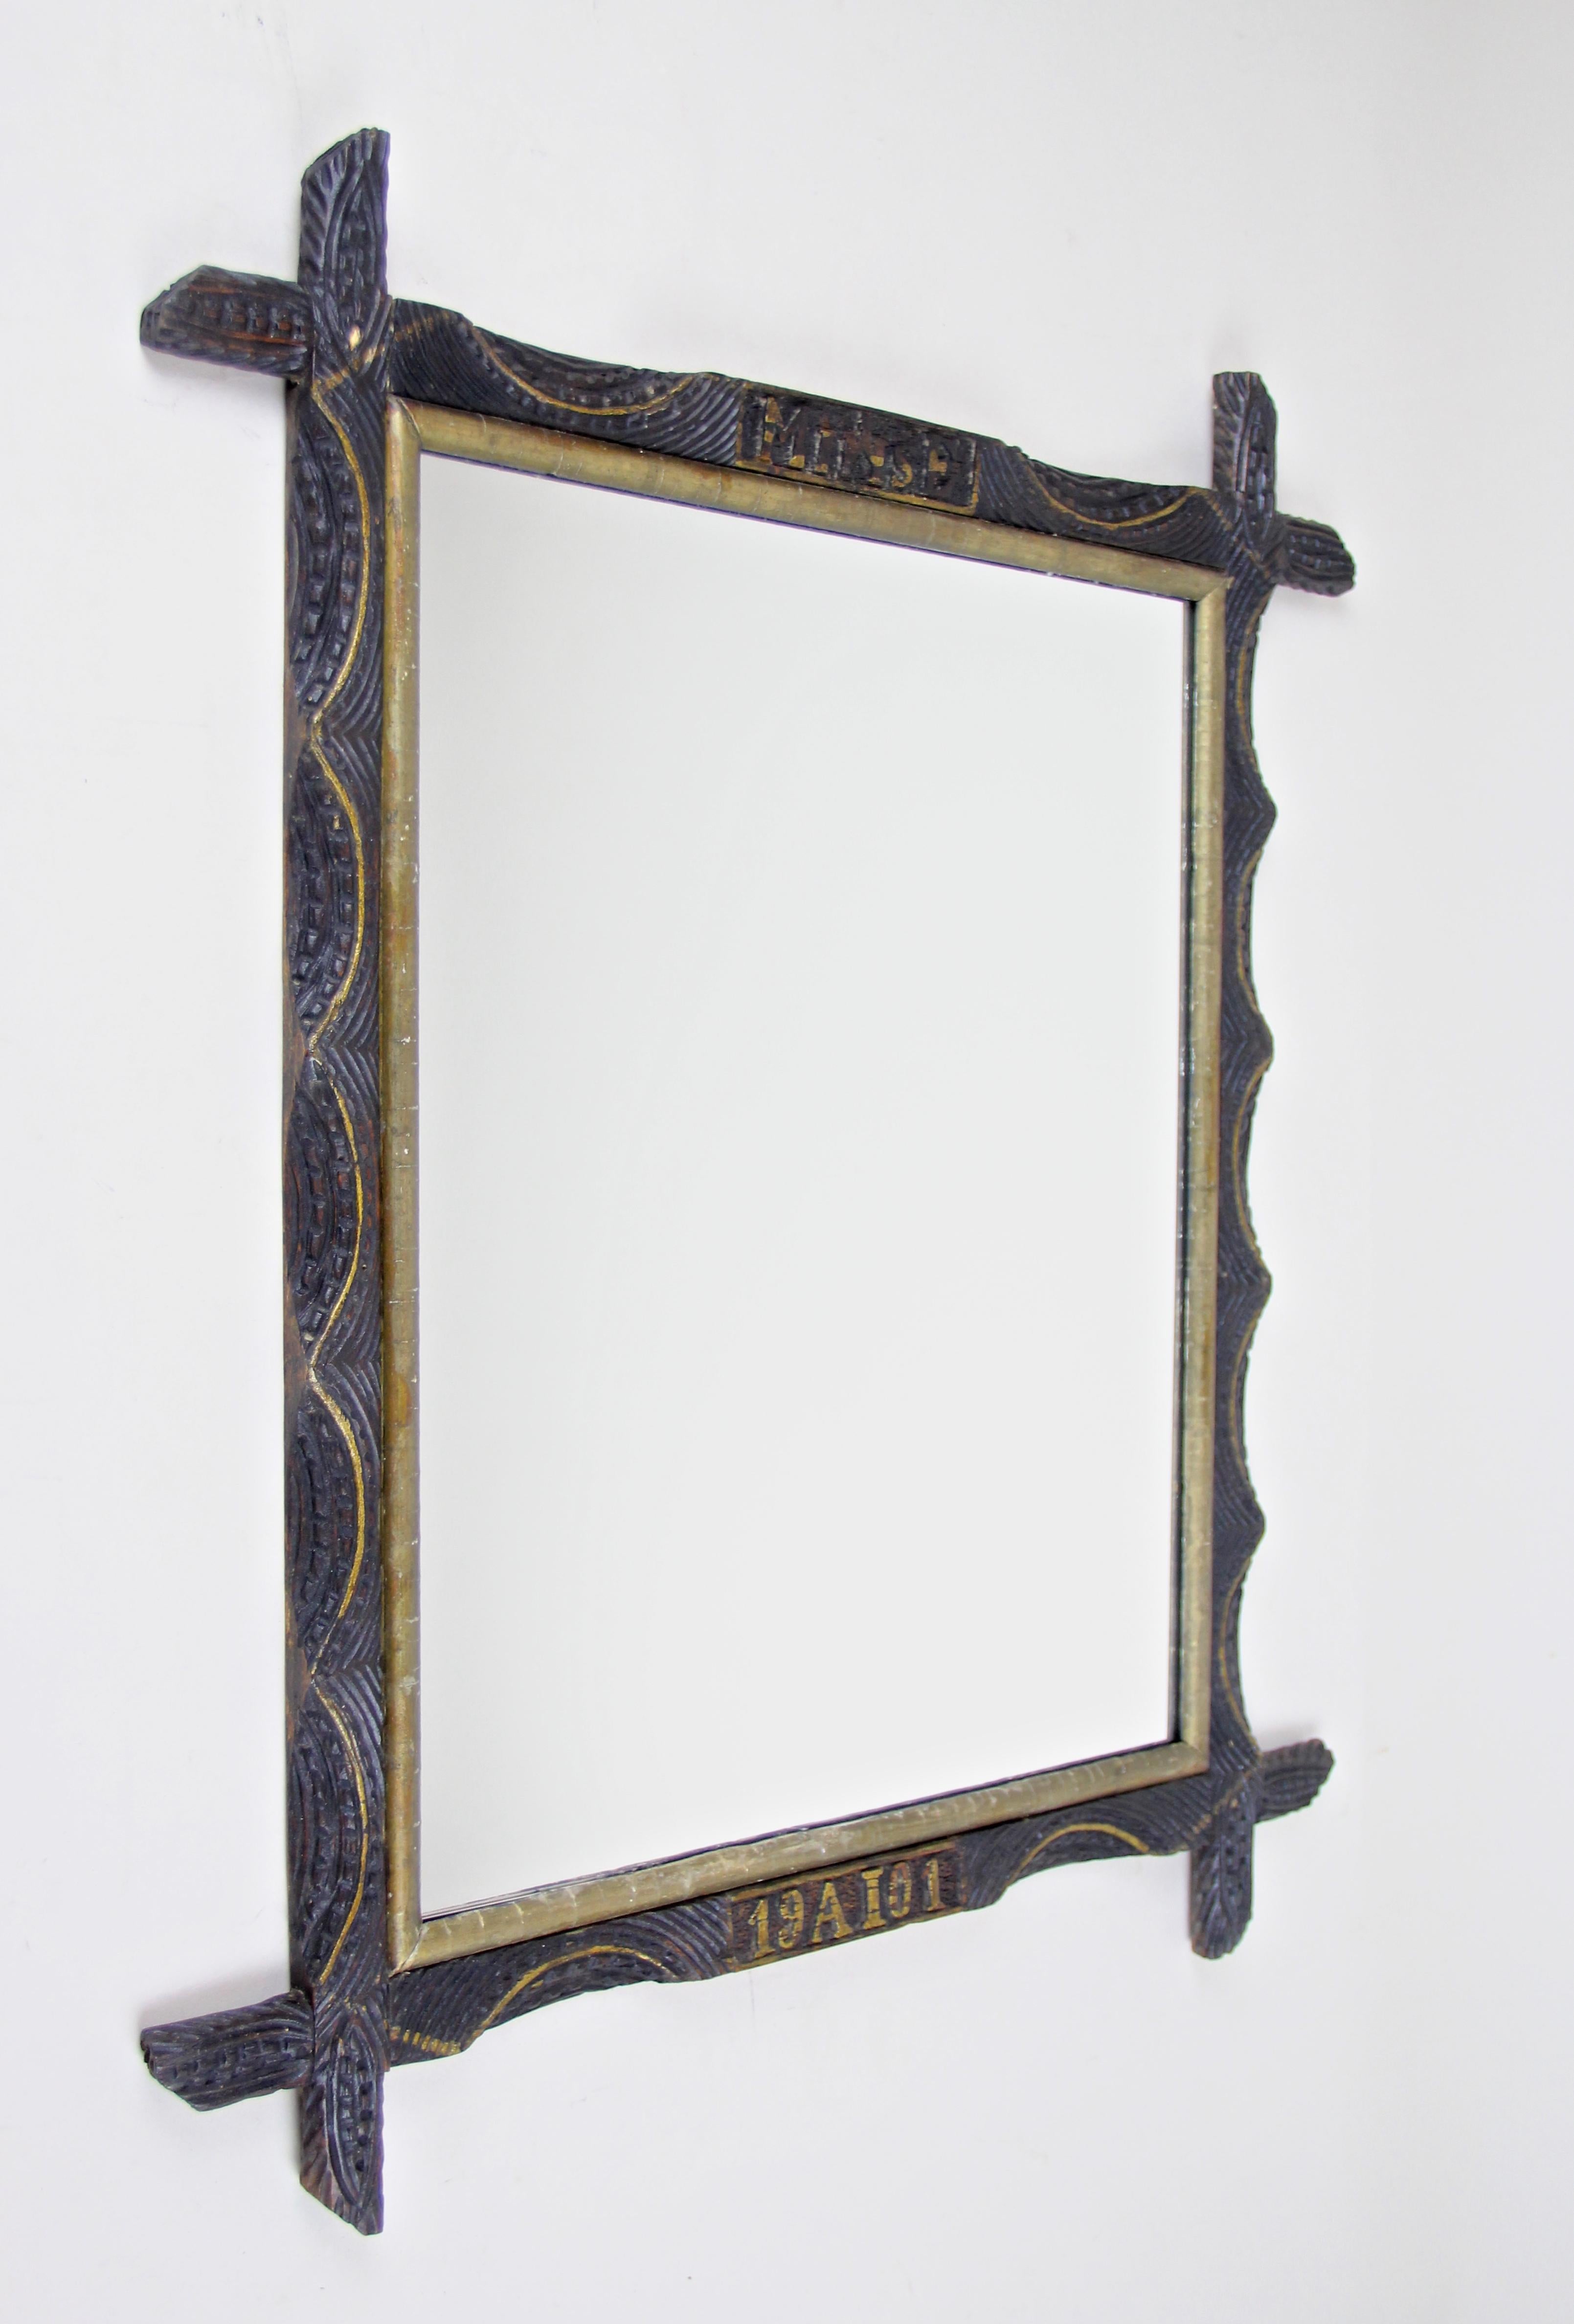 Peerless rustic wooden wall mirror from Austria, dated to 1901. A very special designed wall mirror with a golden bar on the inside and protruding corners. Artfully hand carved, this unique frame impresses with its beautiful shaped wave forms and